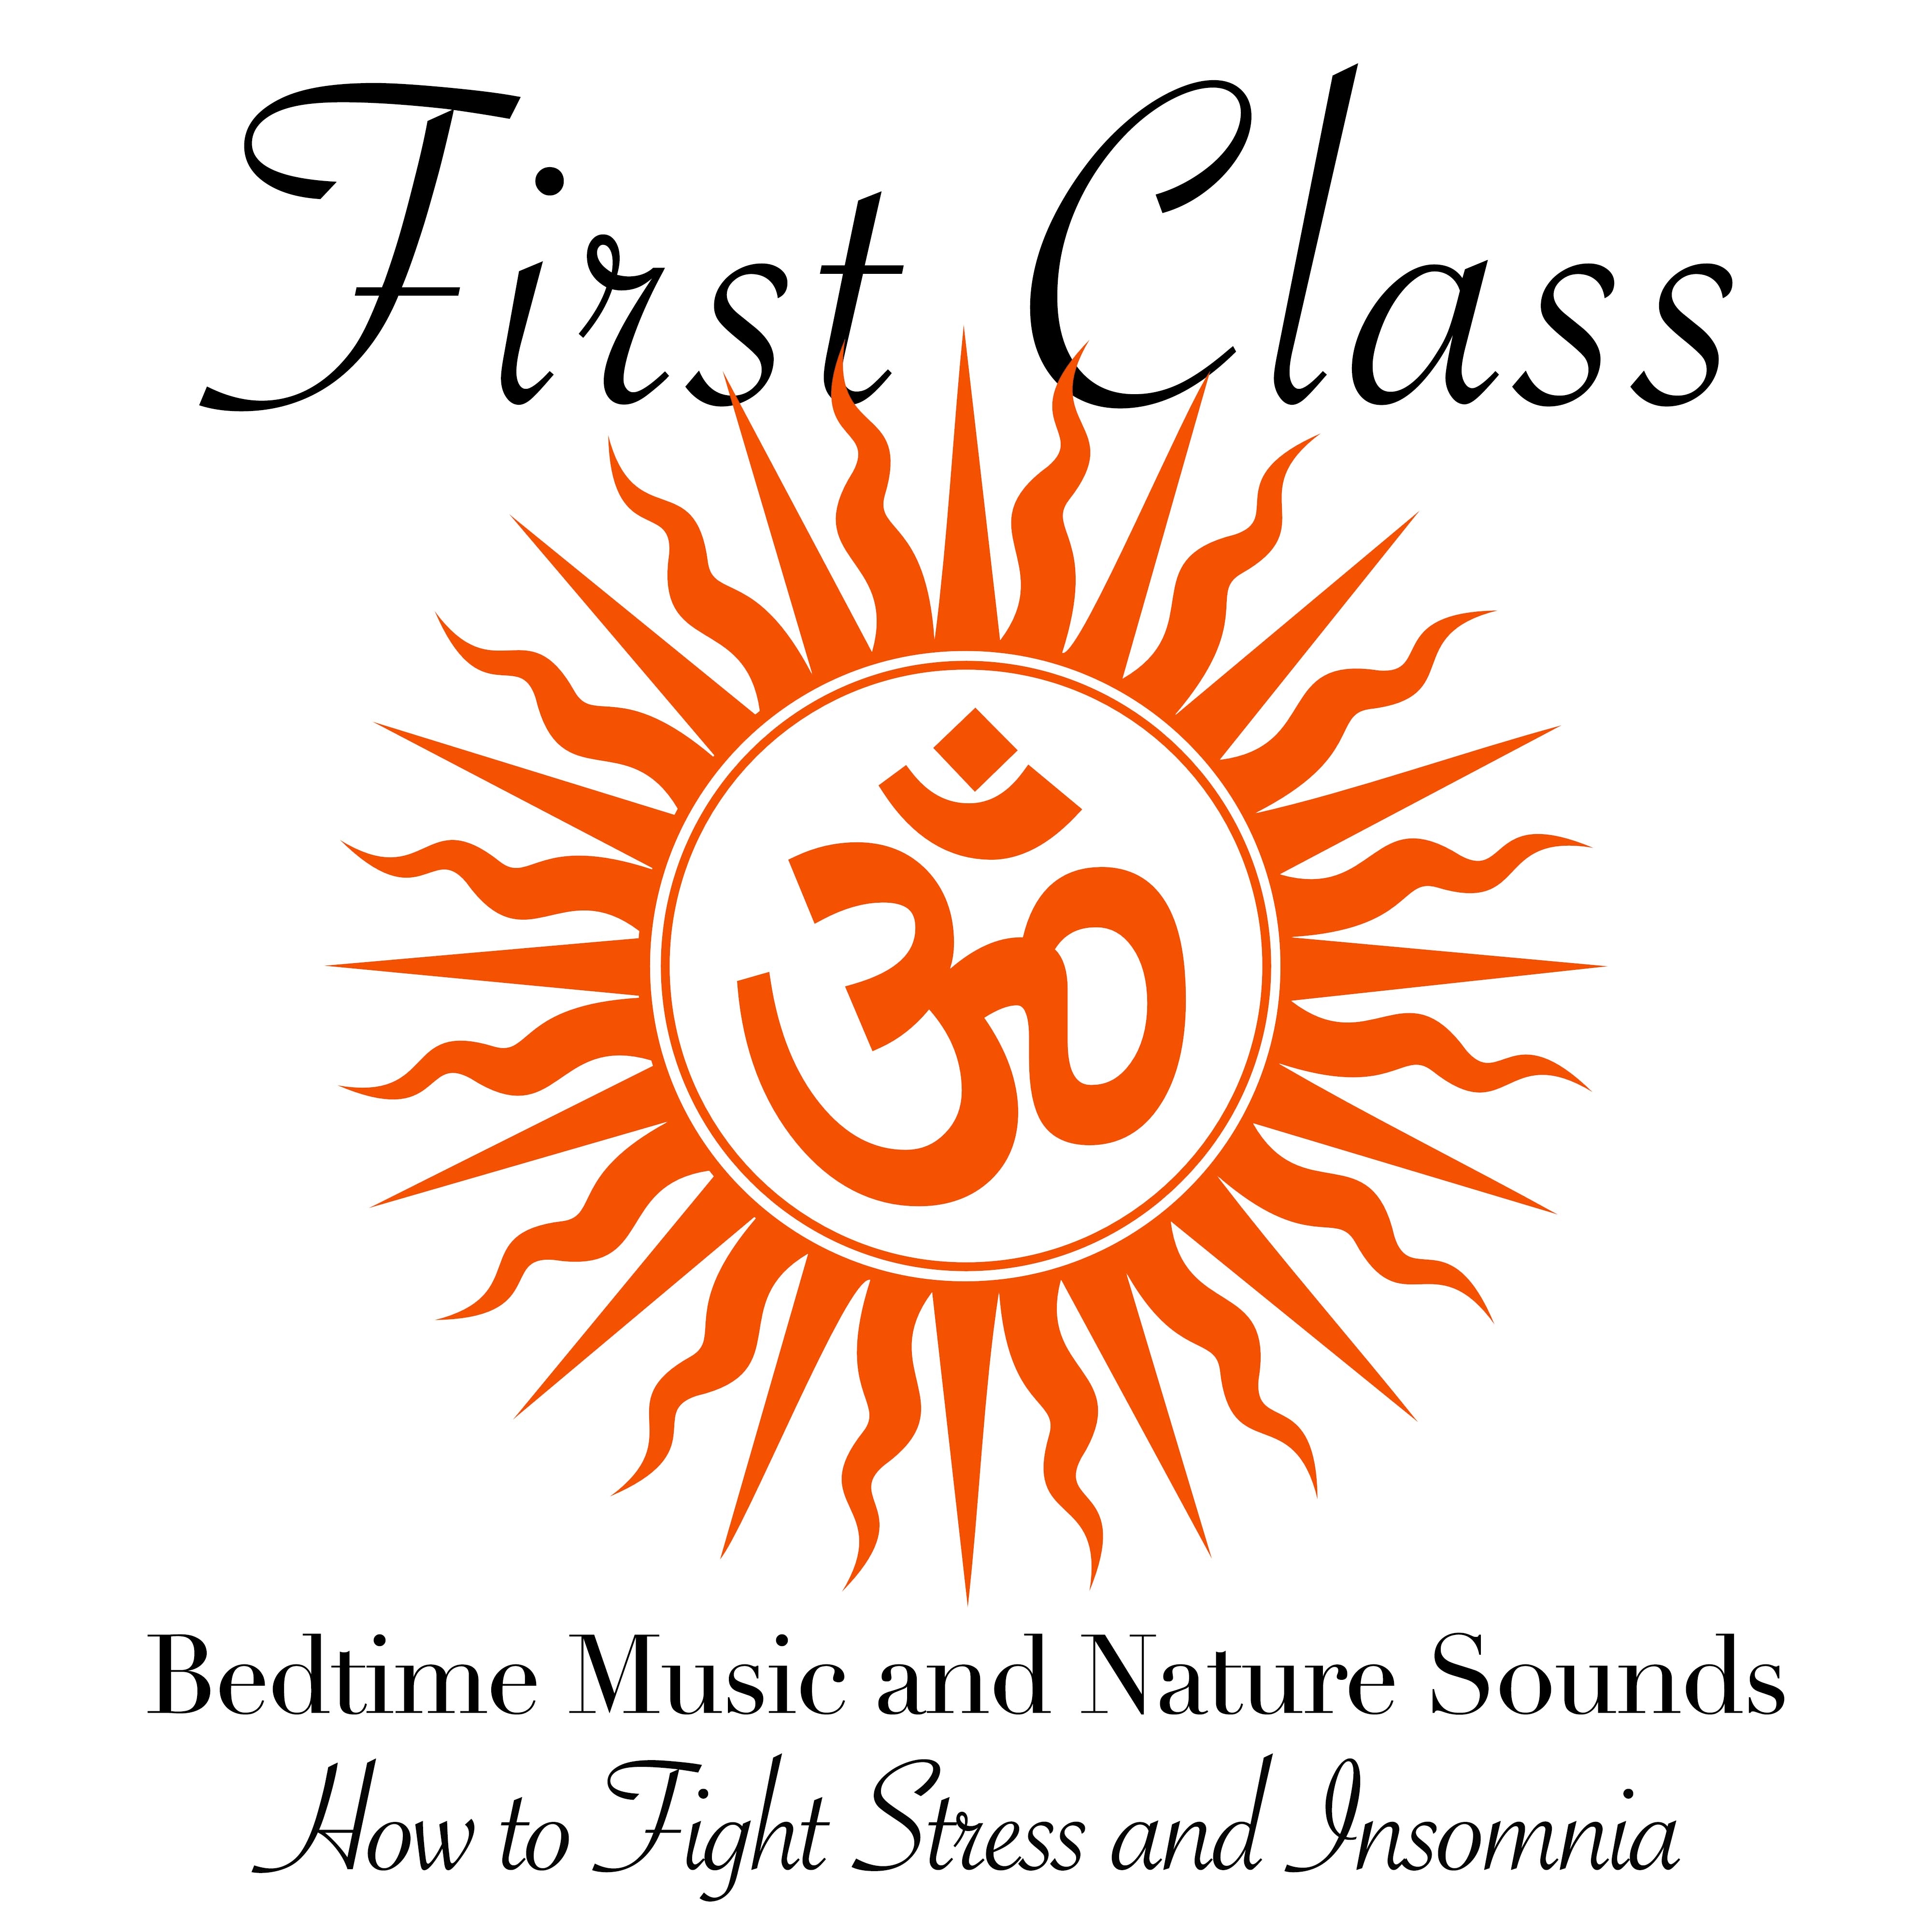 First Class - Bedtime Music with Nature Sounds to Have a Wonderful Sleep, fighting Stress and Insomnia